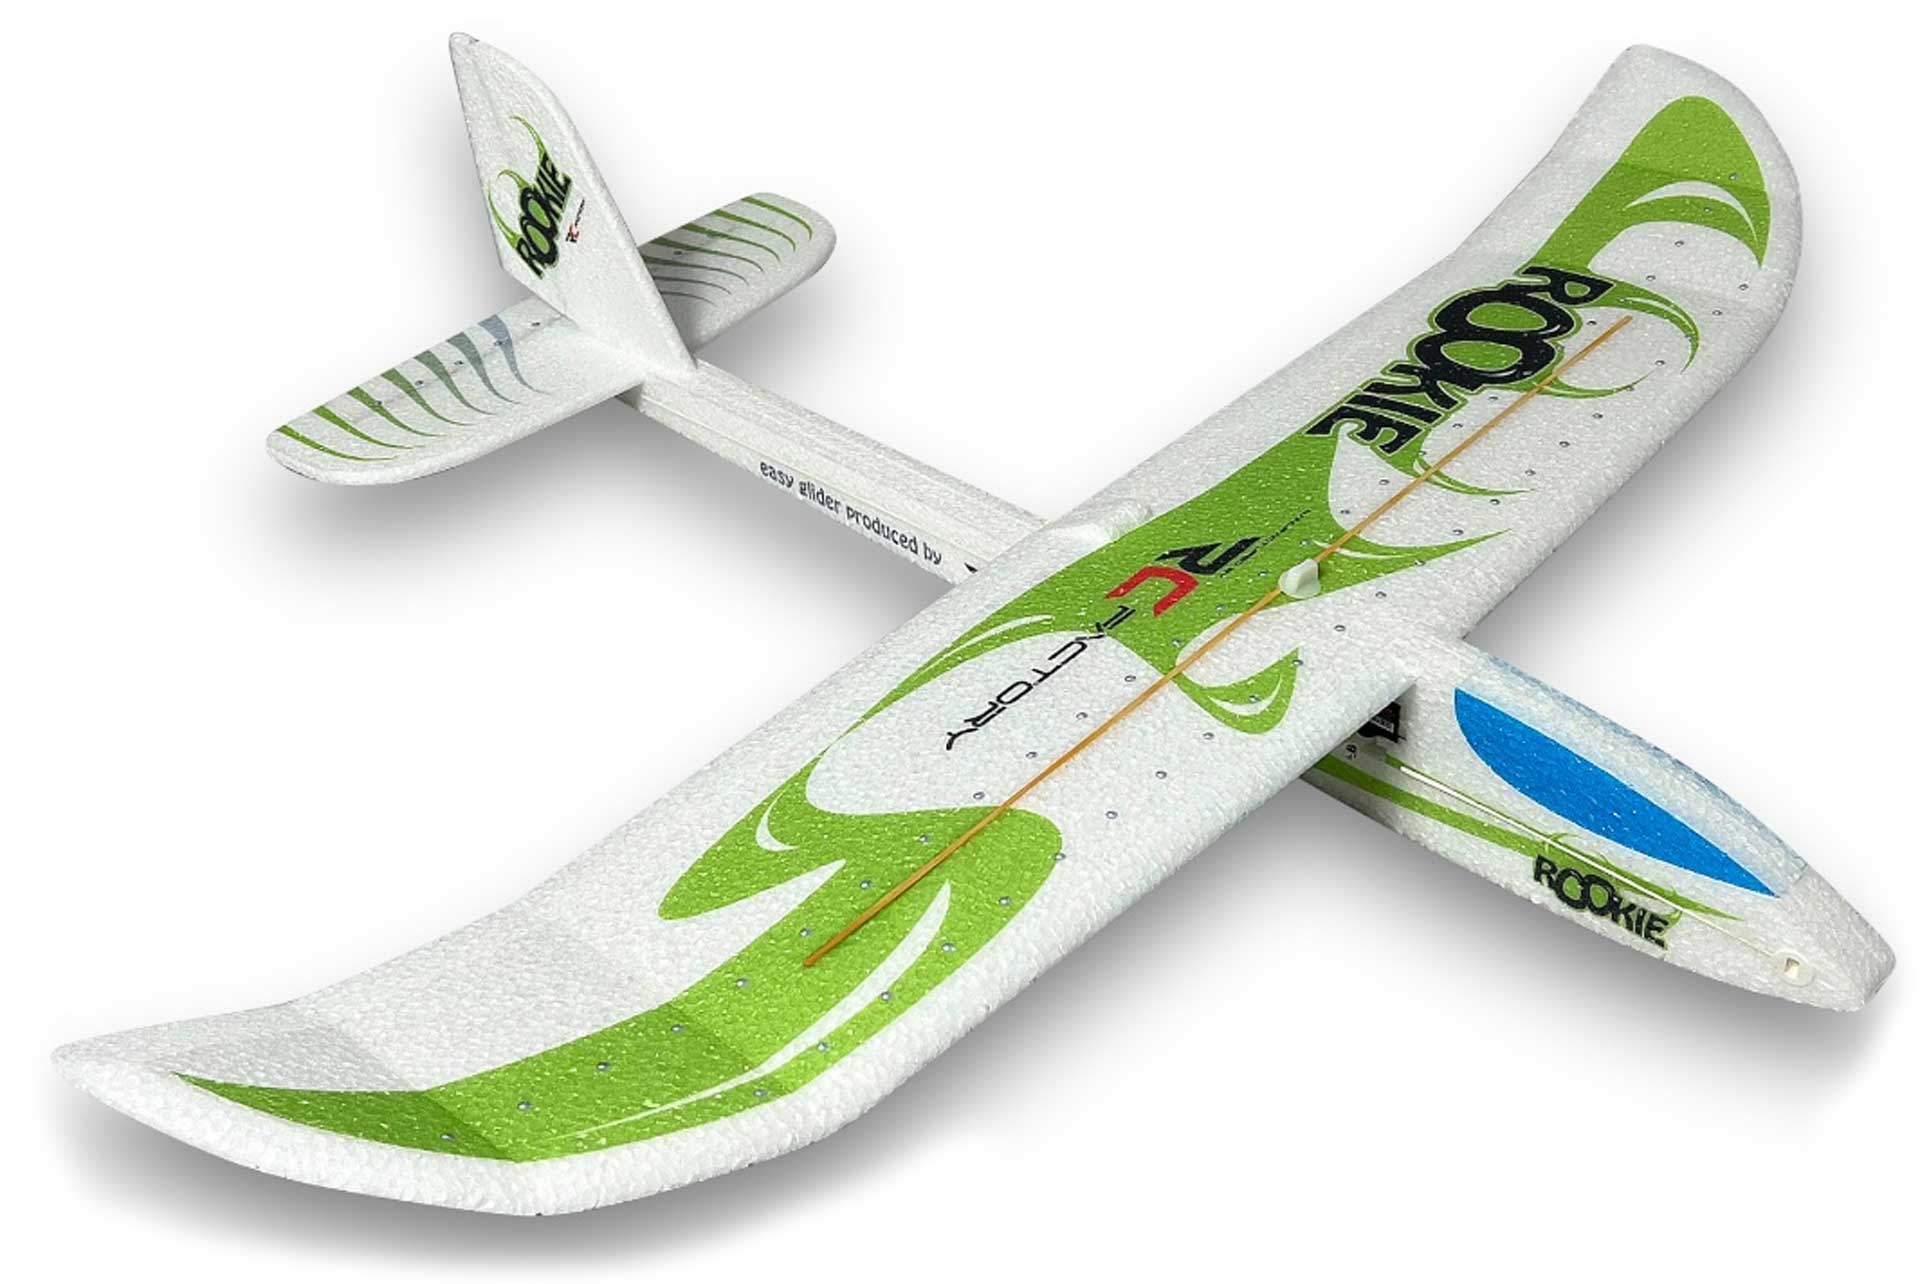 RC-Factory Rookie green hand gliders or R/C model